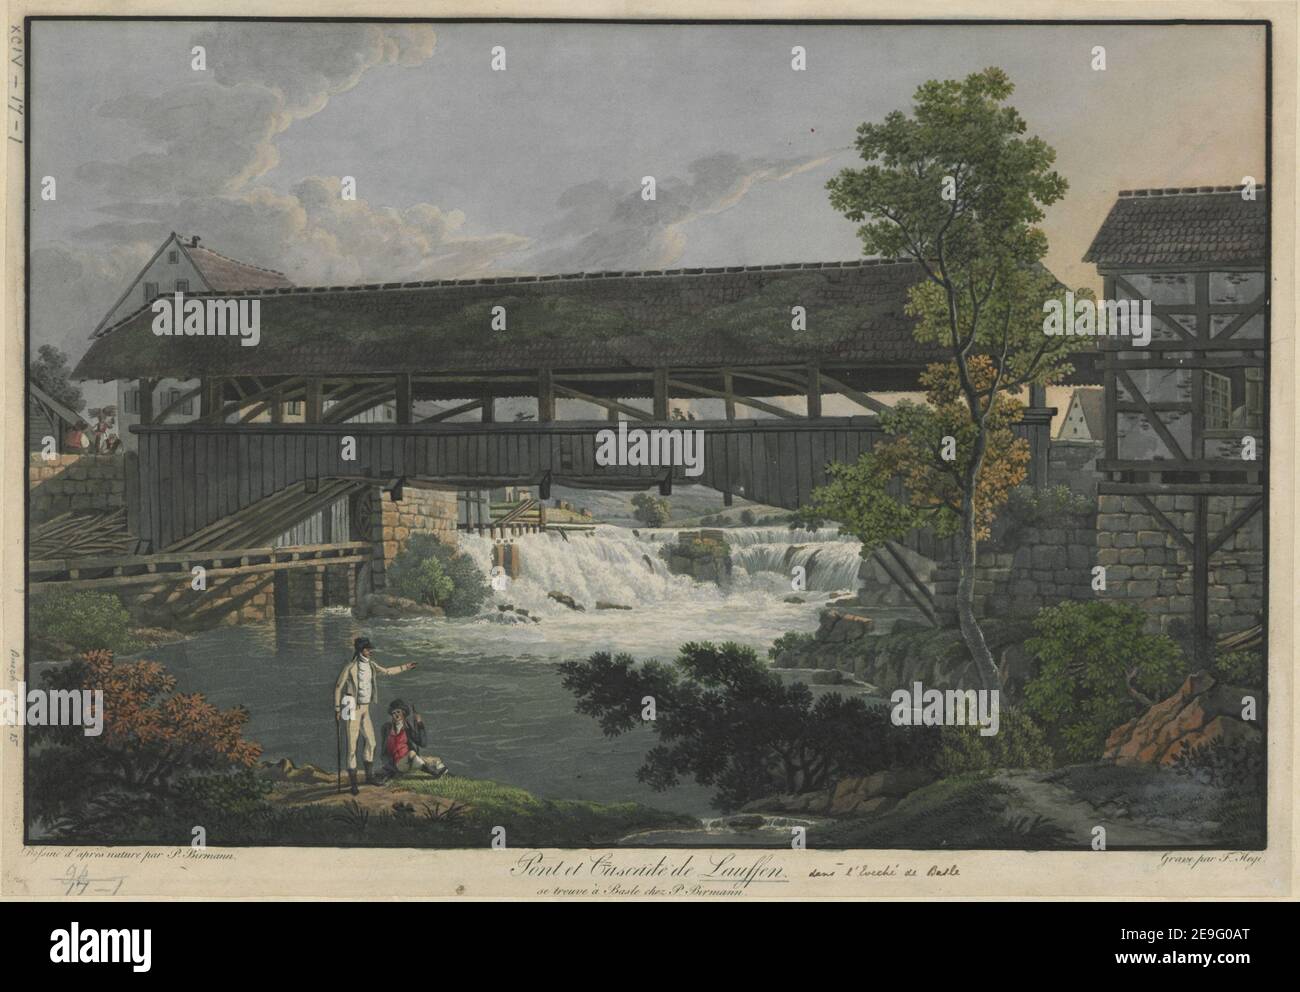 Pont et Cascade de Lauffen.  Author  Hegi, Franz 94.17.1. Place of publication: [Basel] Publisher: [J. decker] Date of publication: [1802]  Item type: 1 print Medium: aquatint with hand-colouring Dimensions: sheet 24 x 34.5 cm.  Former owner: George III, King of Great Britain, 1738-1820 Stock Photo